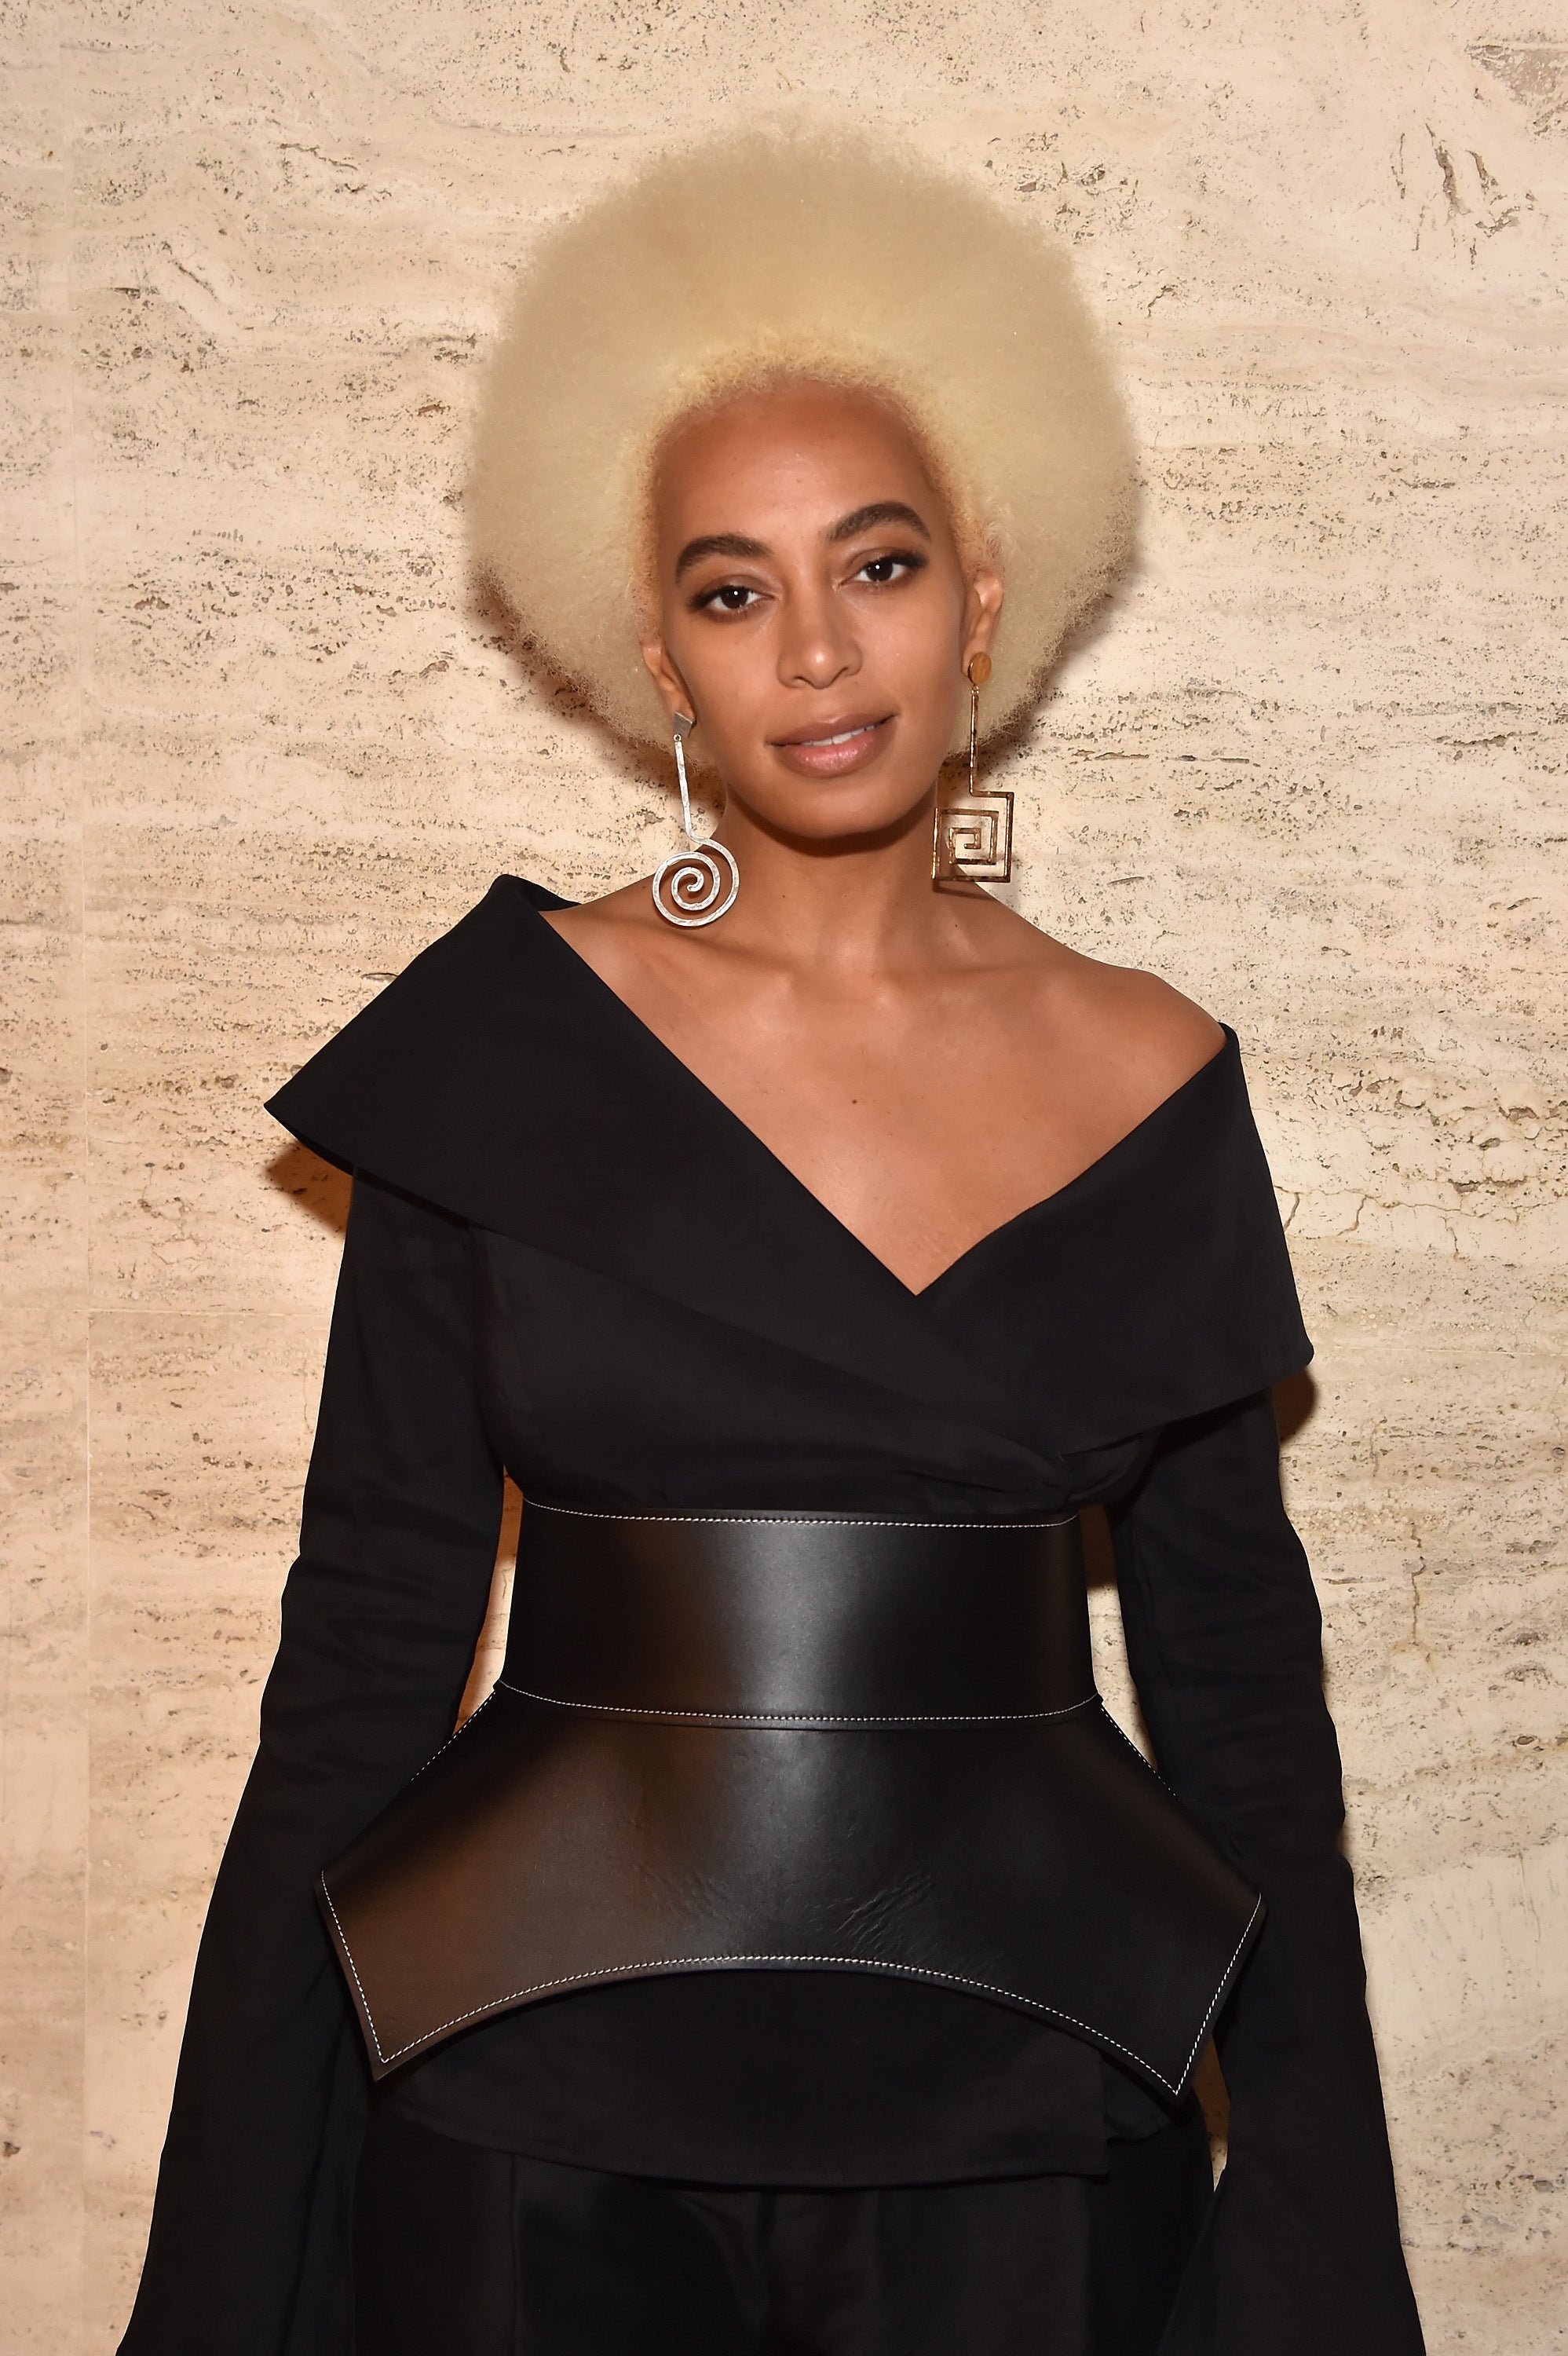 Solange Talks Relationship With Father Mathew Knowles